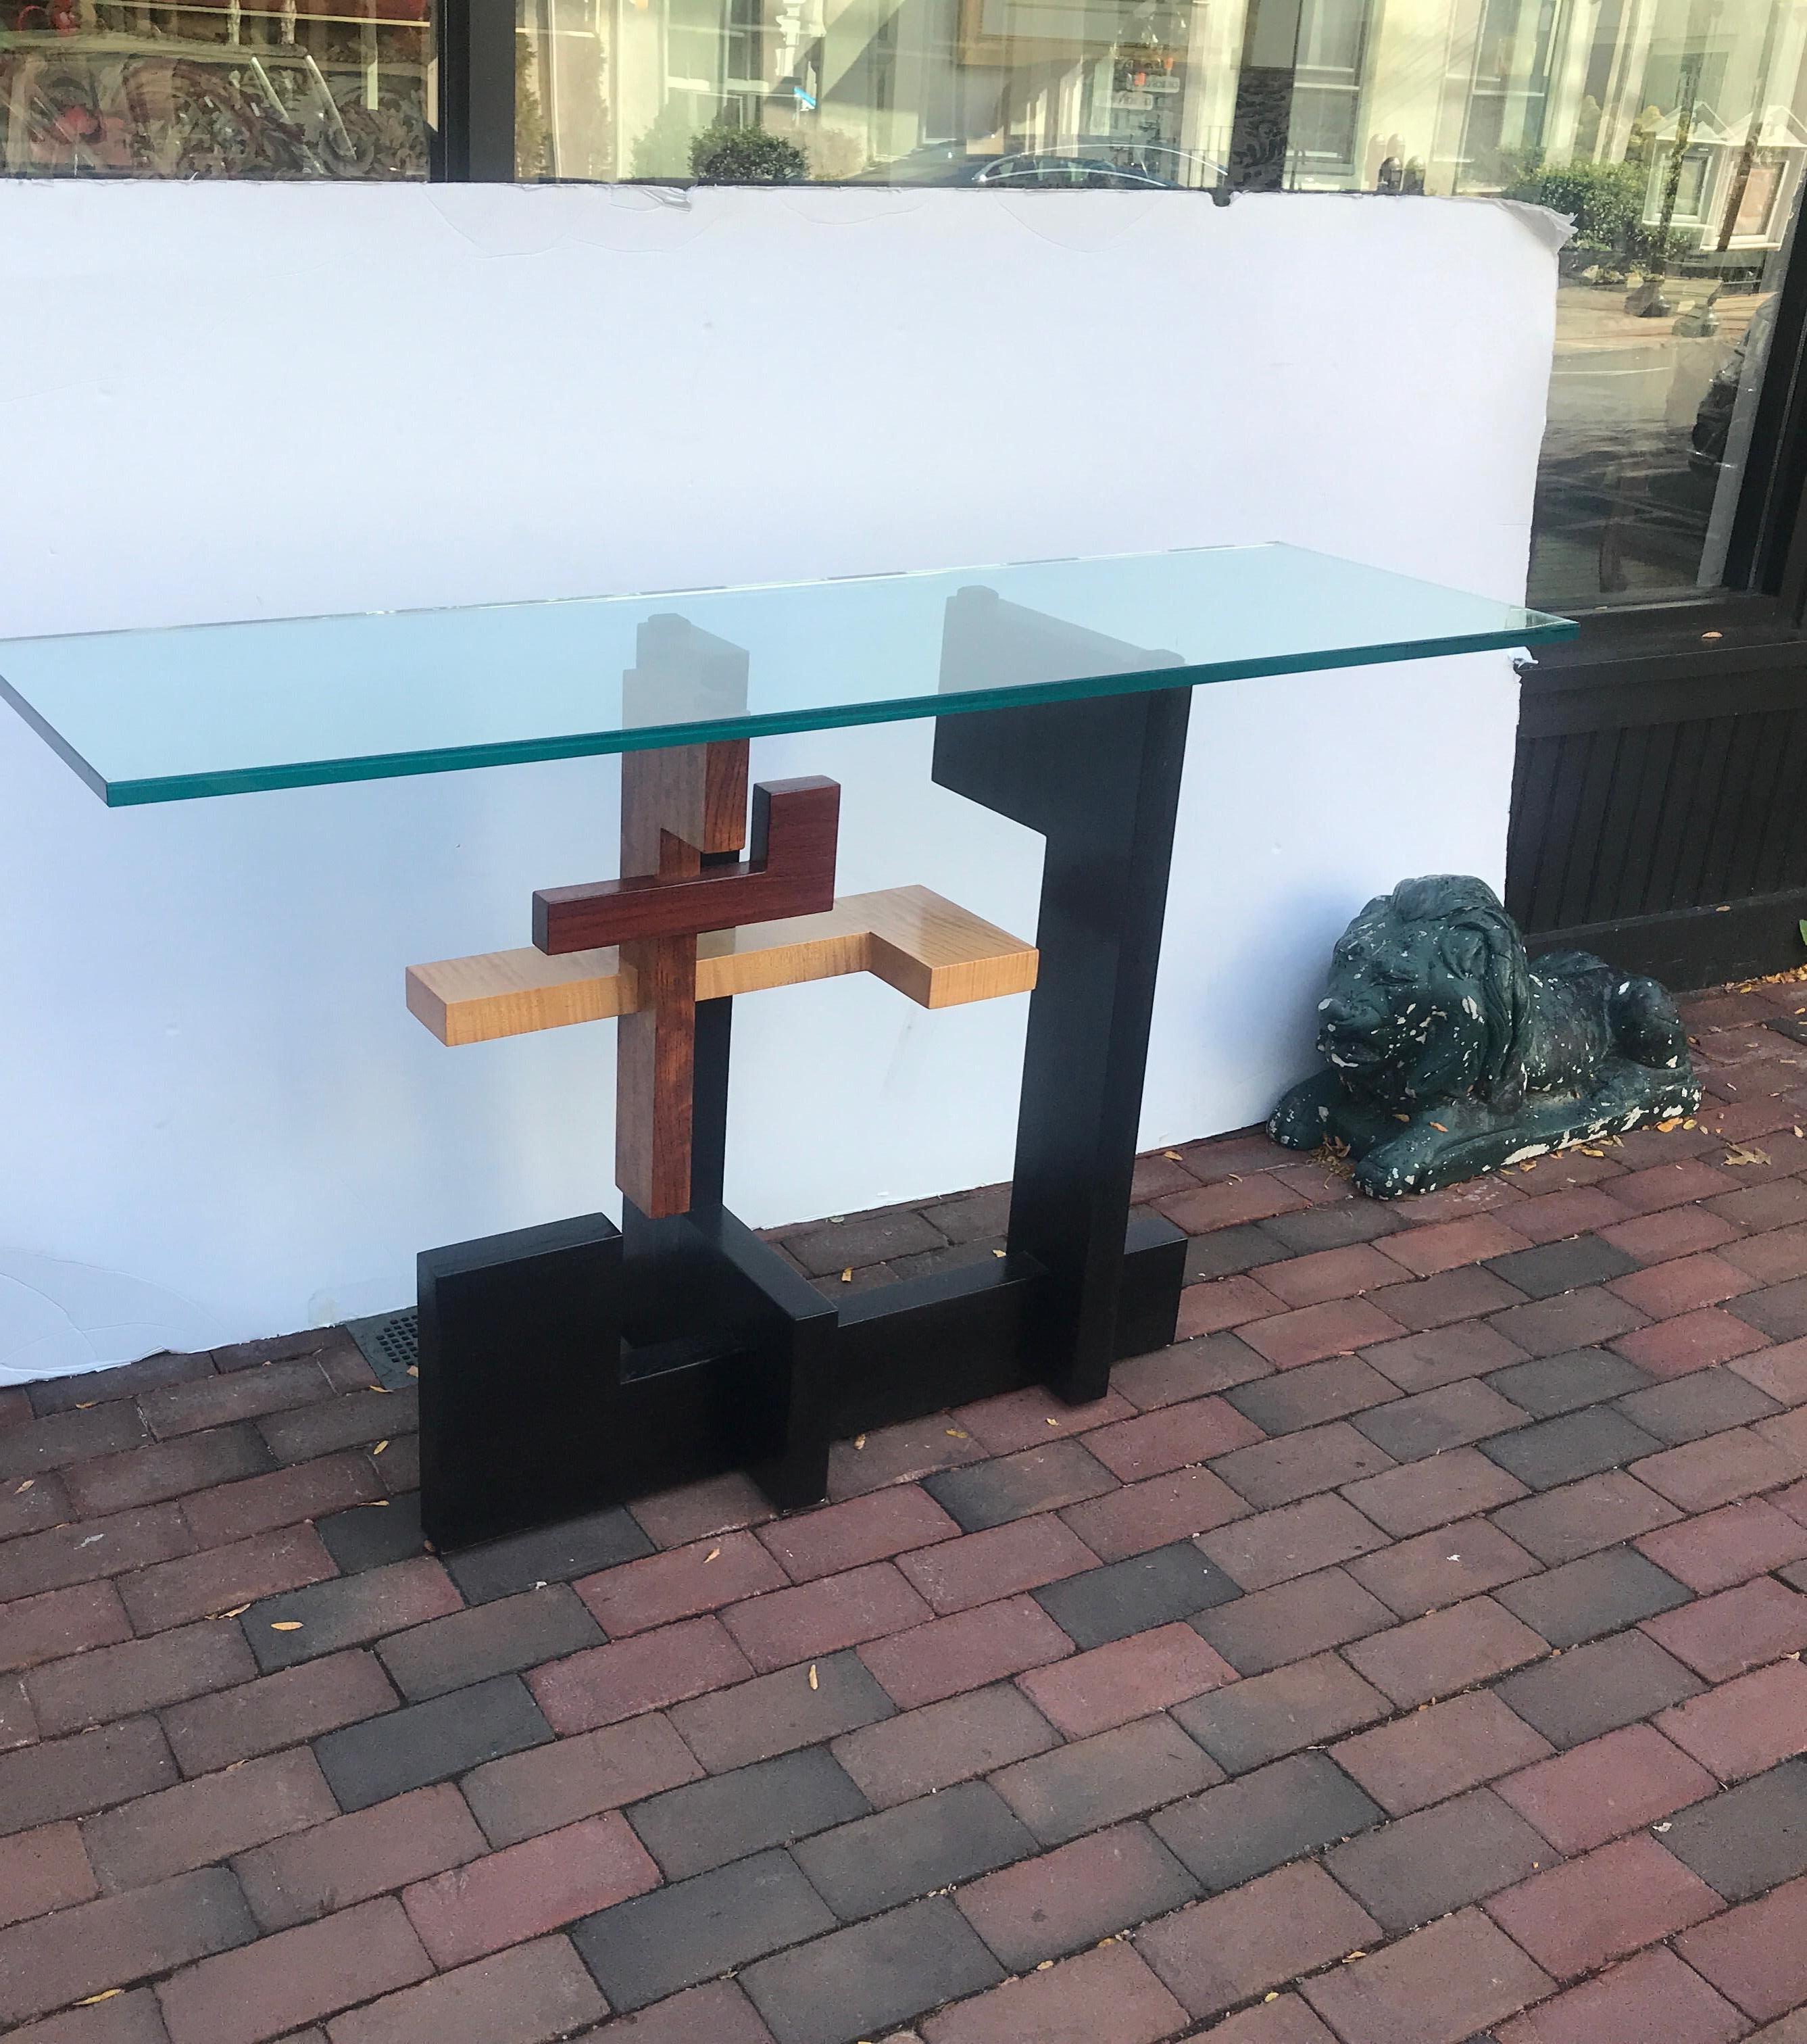 Postmodern mixed wood geometric console table with thick glass top. Signed on the underside, the tiger maple, walnut and ebonized wood in an artistically executed design.